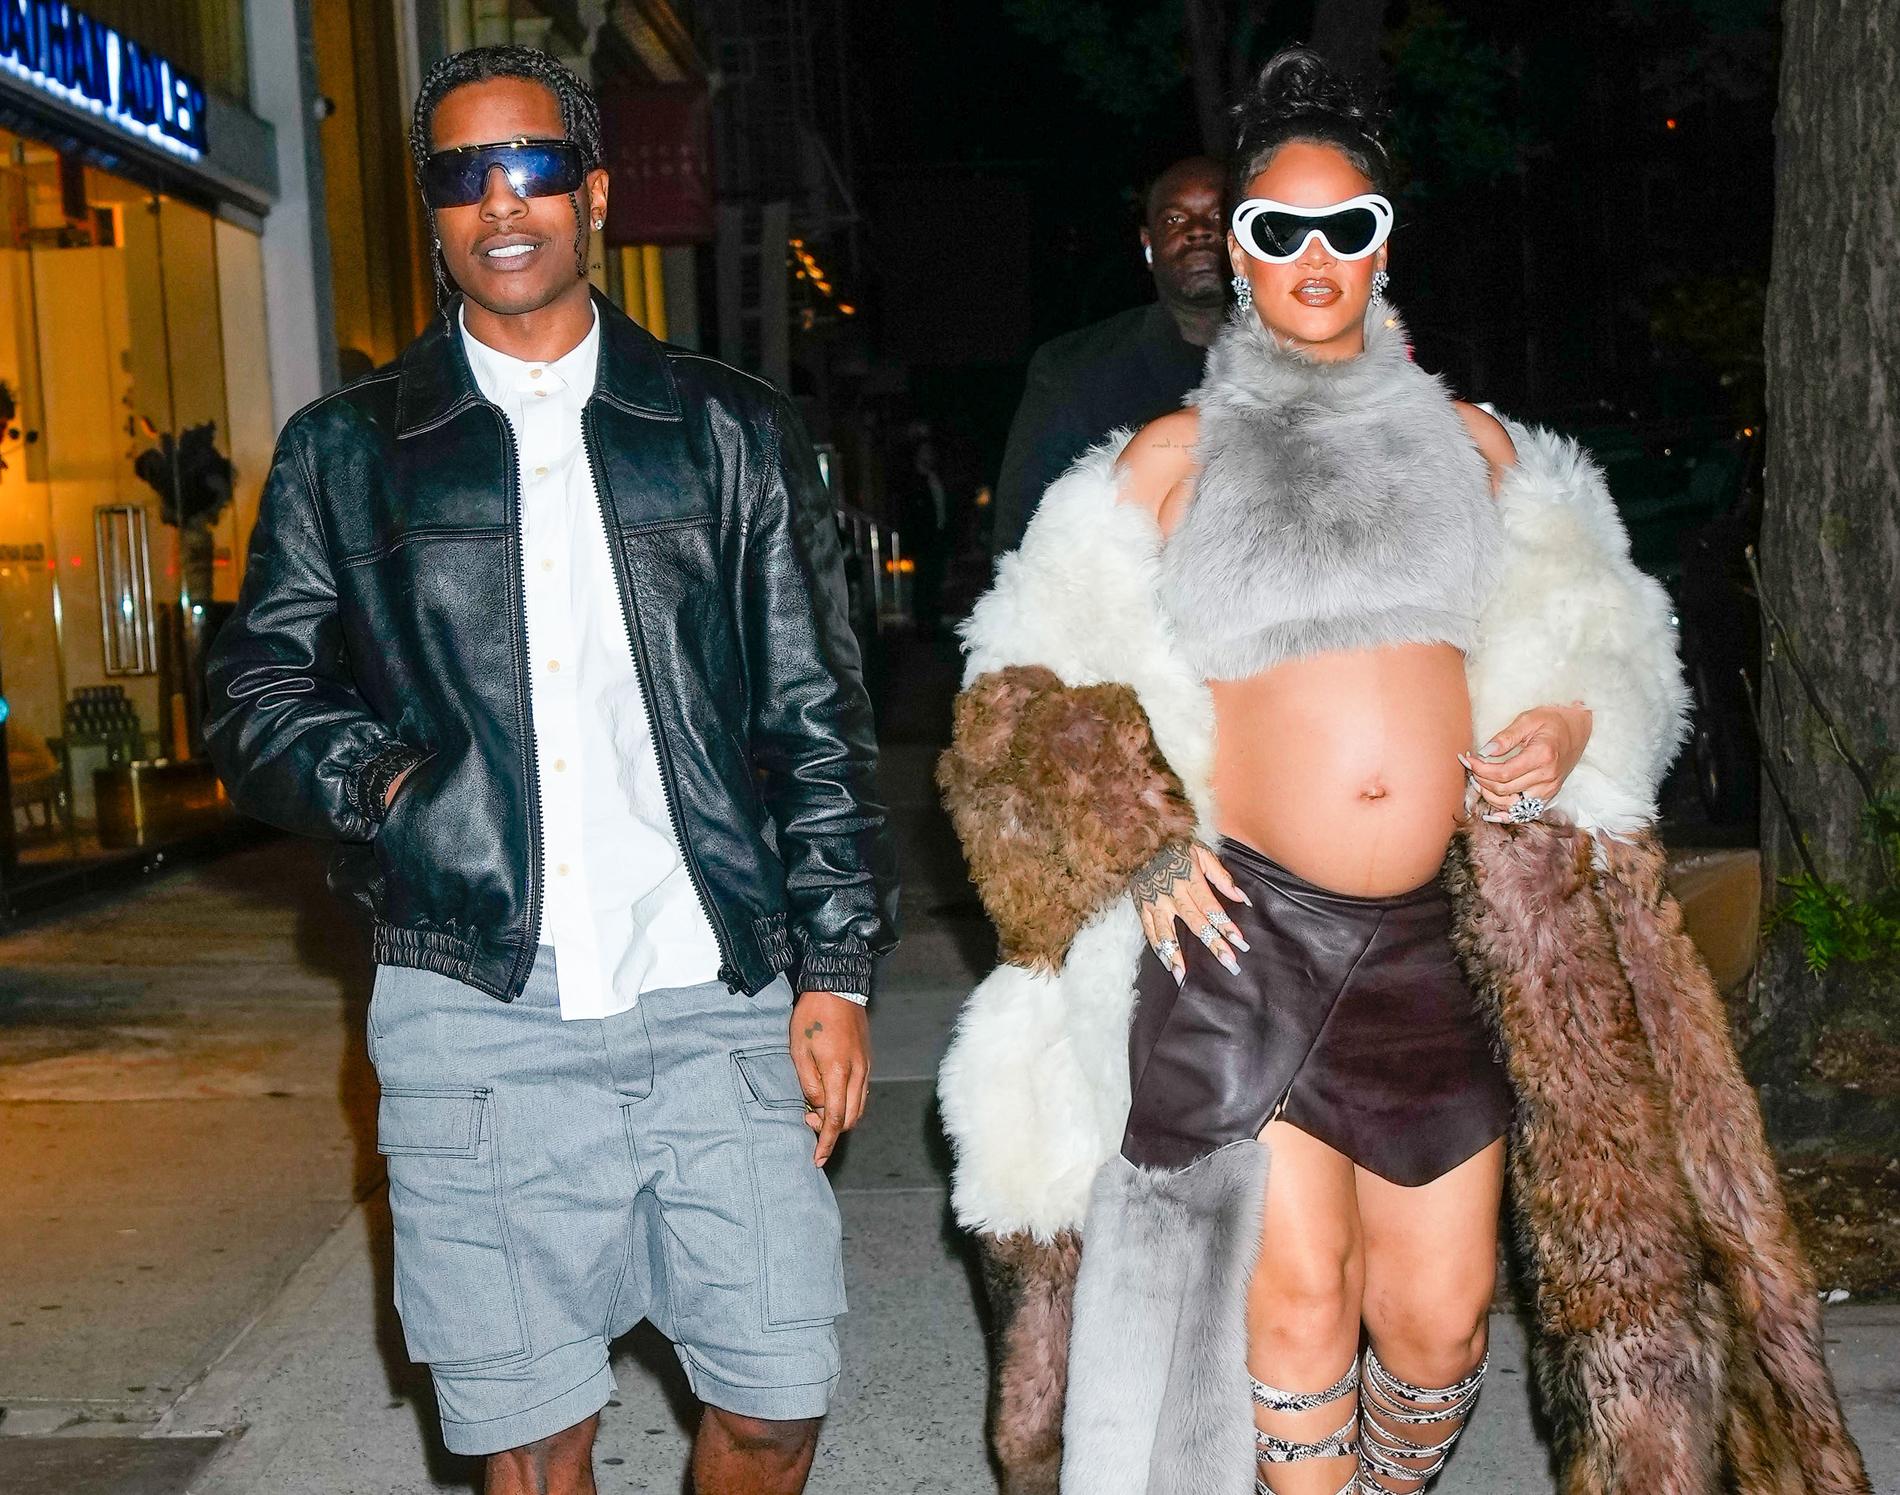 Rihanna Gives Birth: The Arrival of Her Second Child with A$AP Rocky